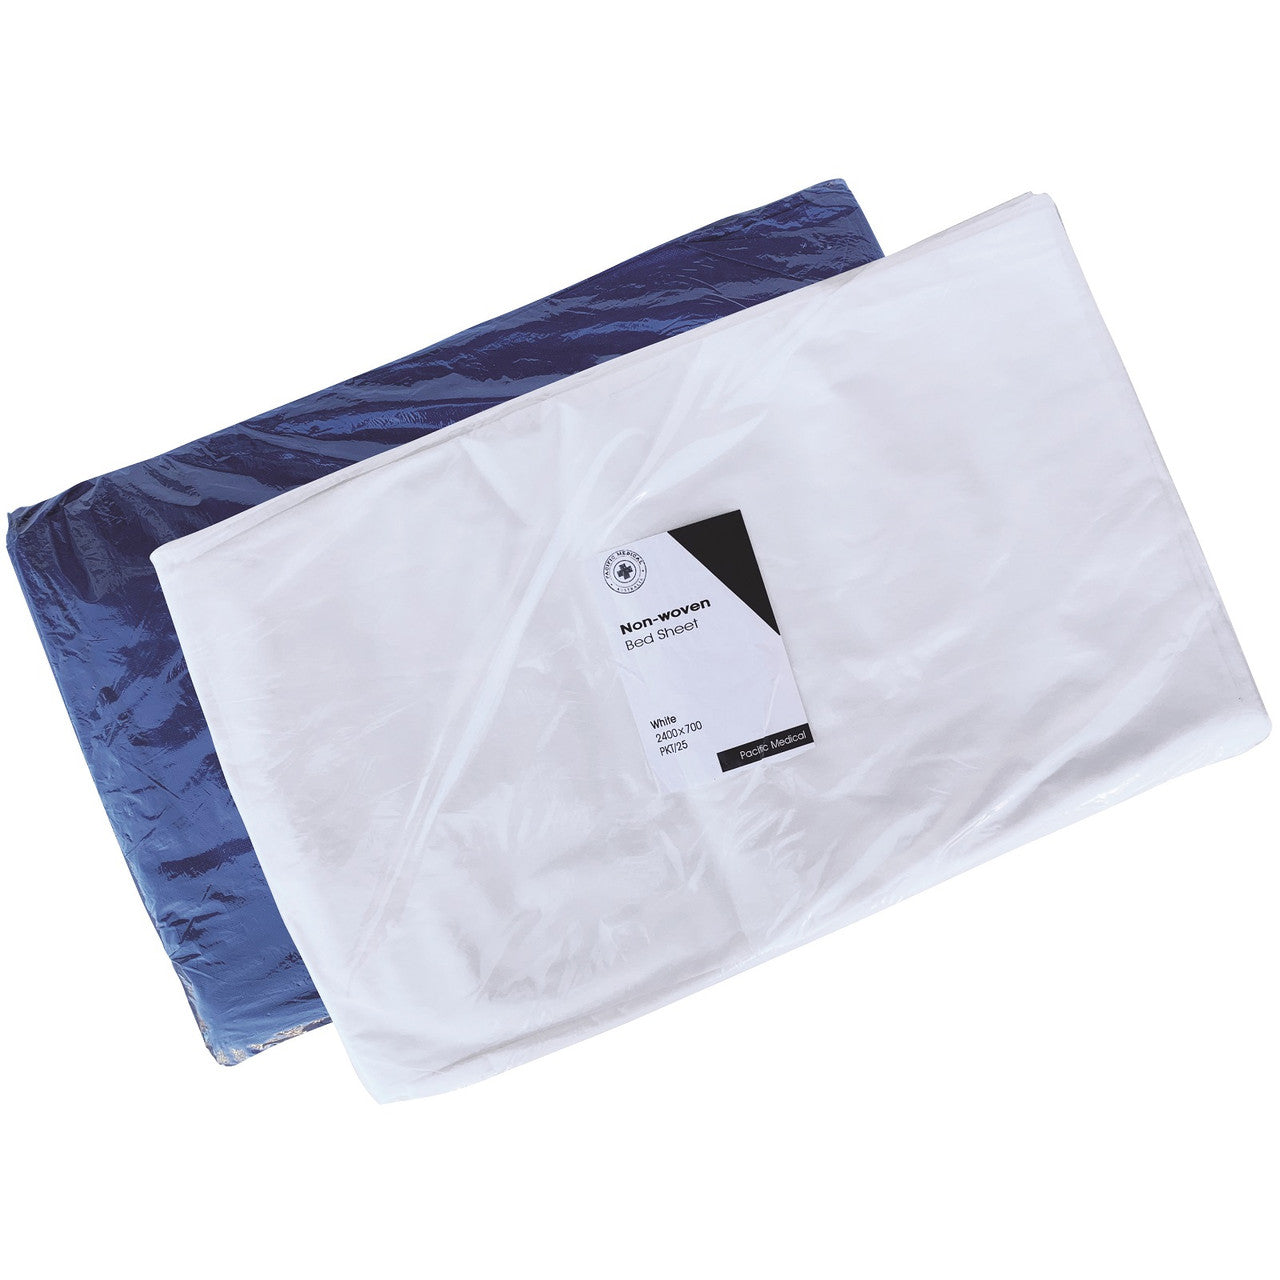 Bed Sheet Flat 240 X 70cm Non-Woven Universal 100 Sheets - Blue or White